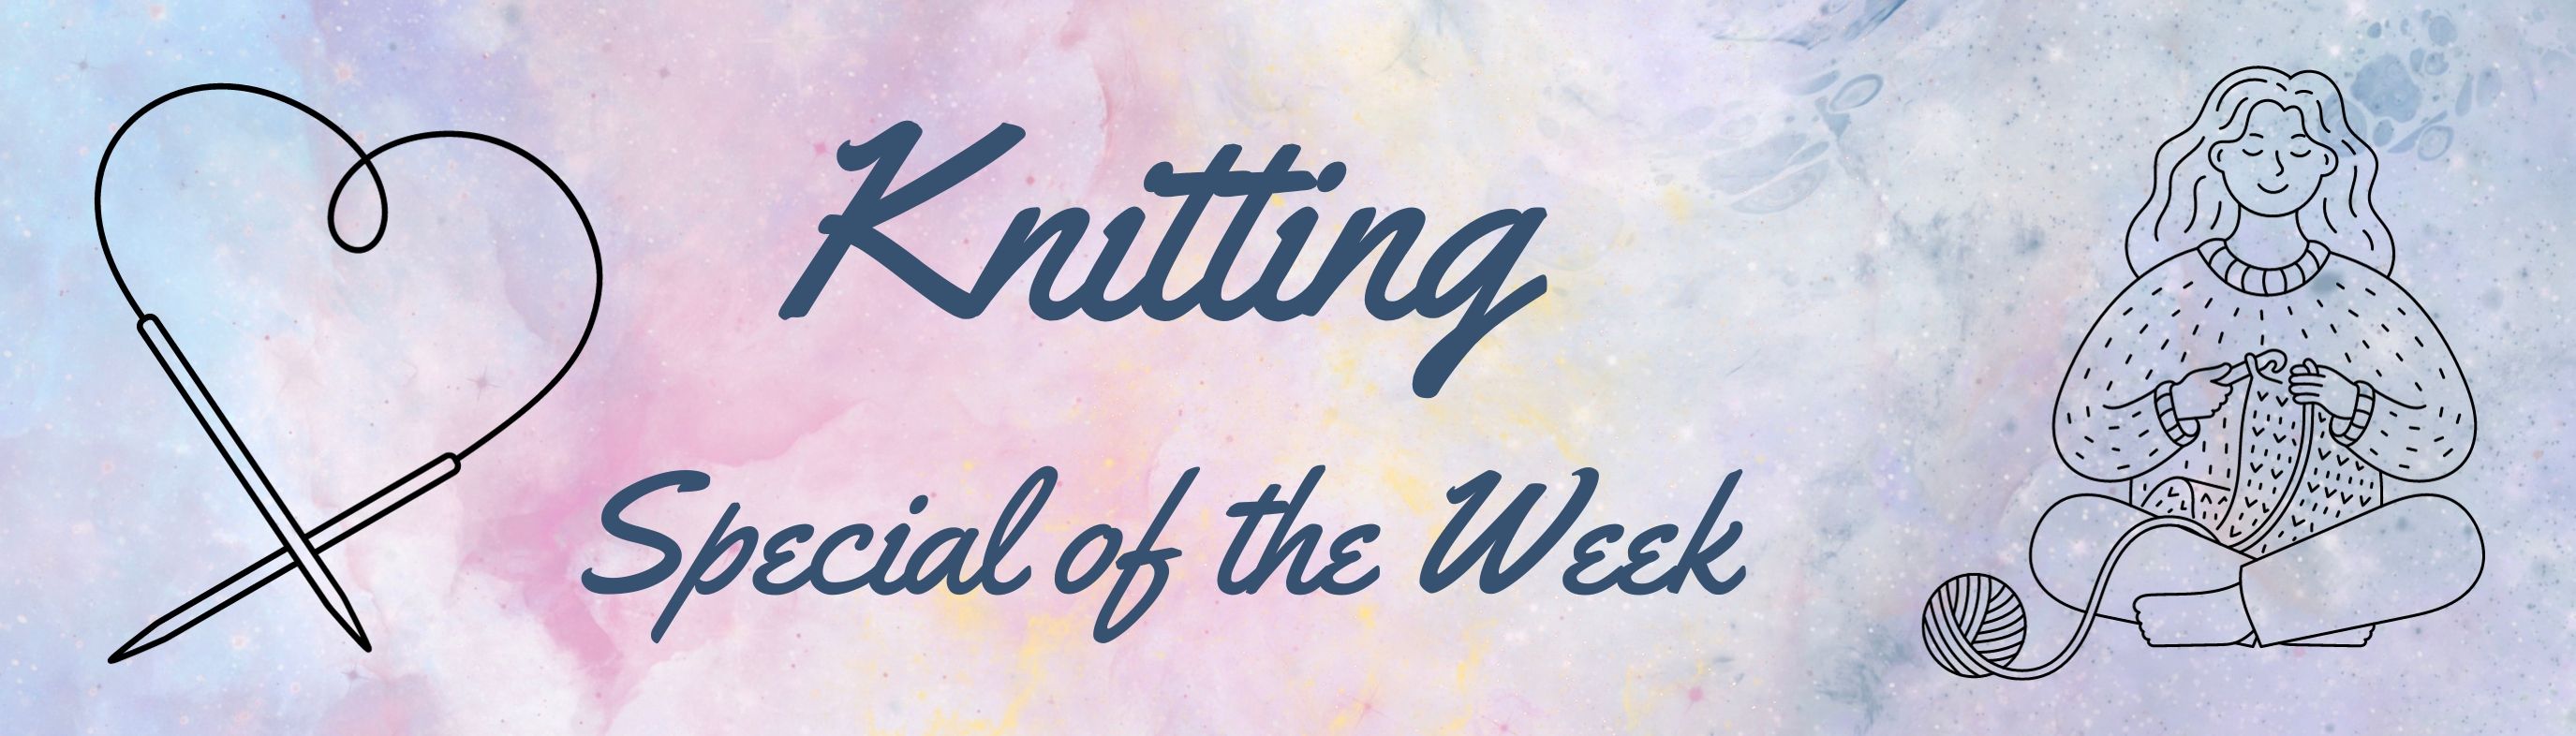 Knitting Special of the Week